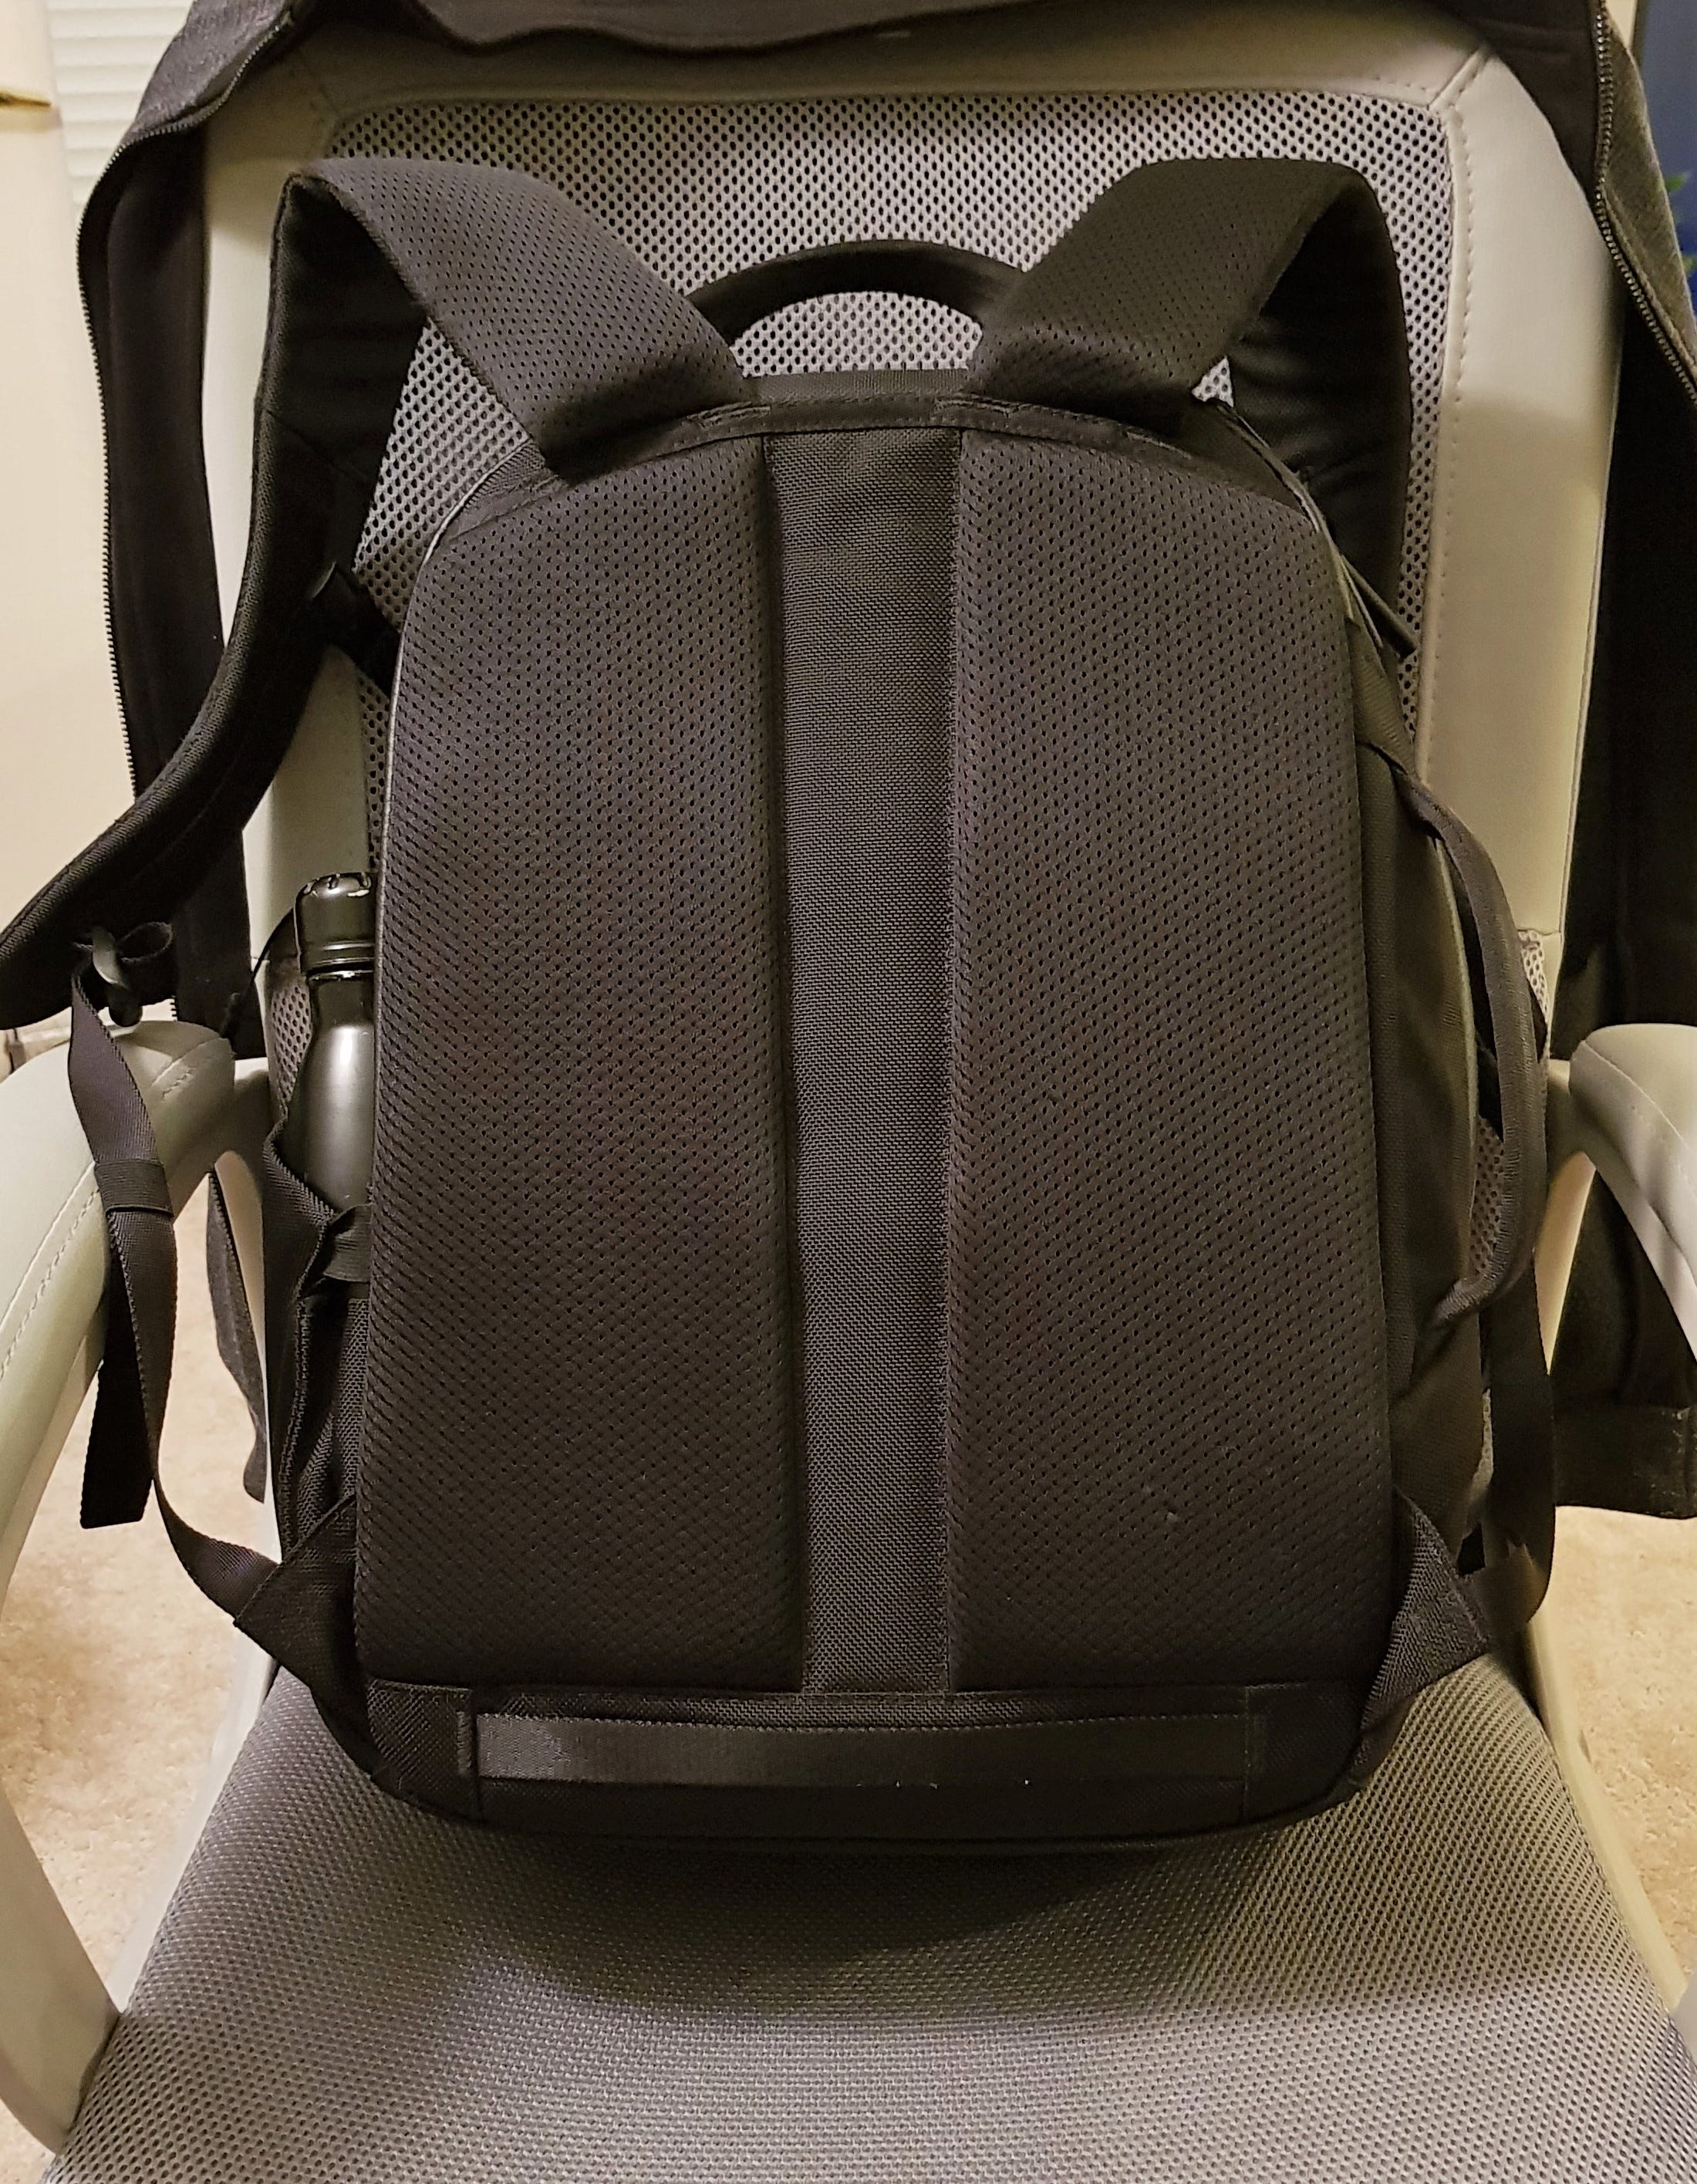 Aer Tech Pack Review. By now you probably know who Aer is… | by Geoff C ...